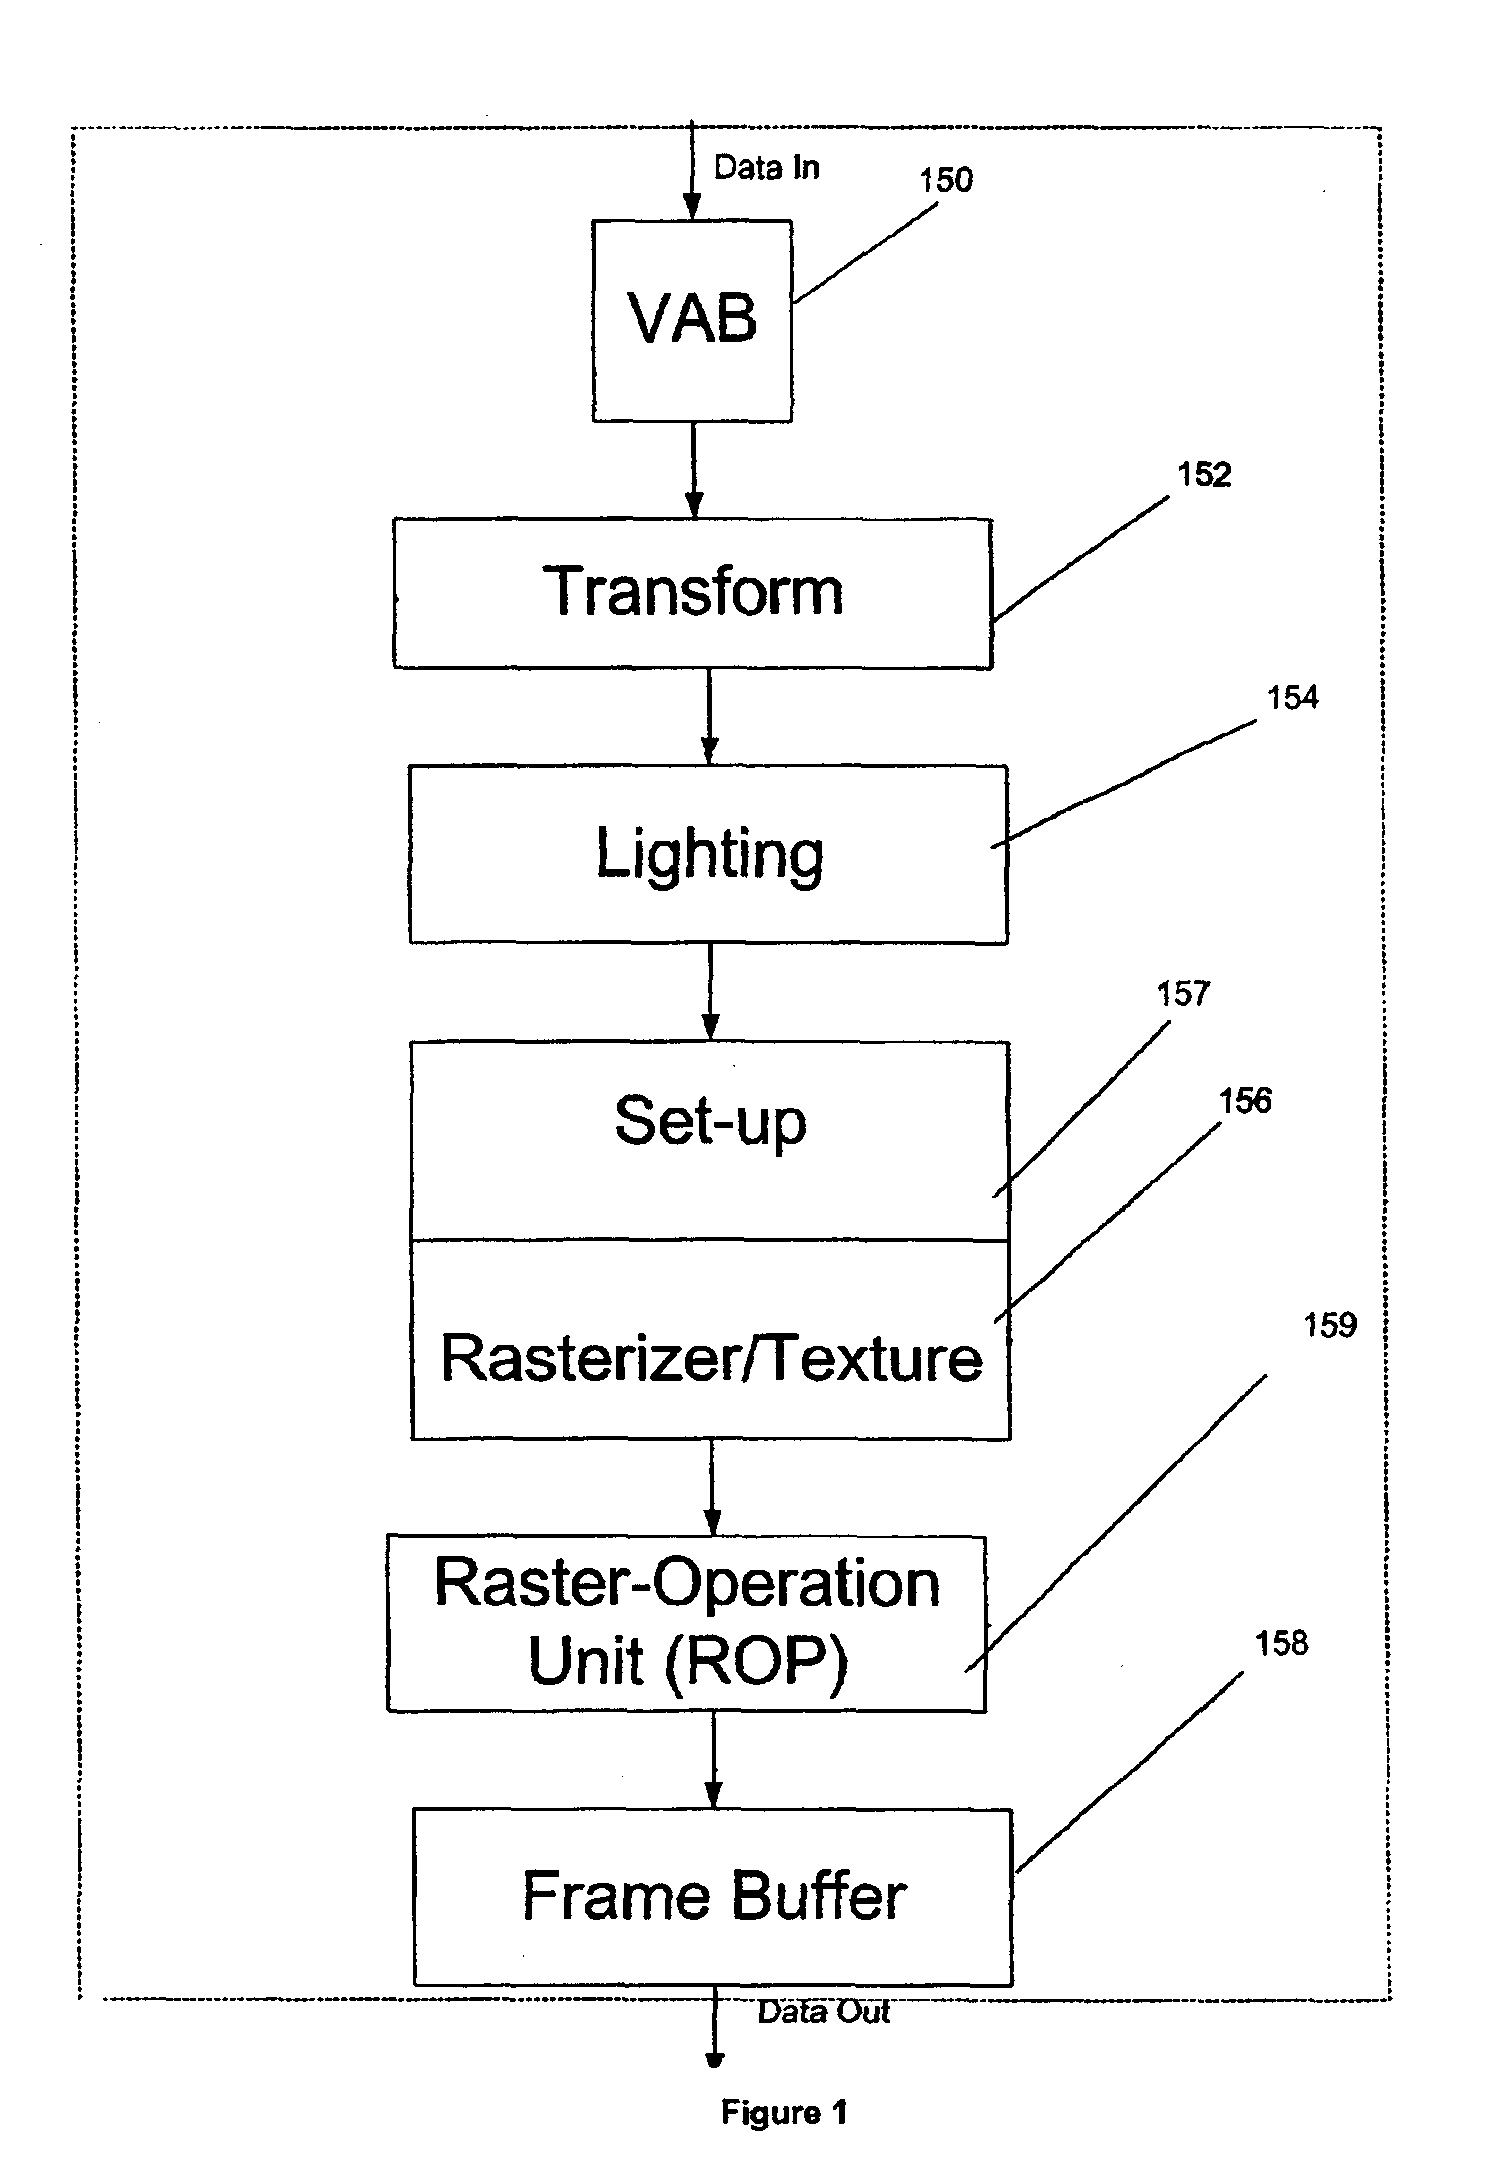 Order-independent transparency rendering system and method